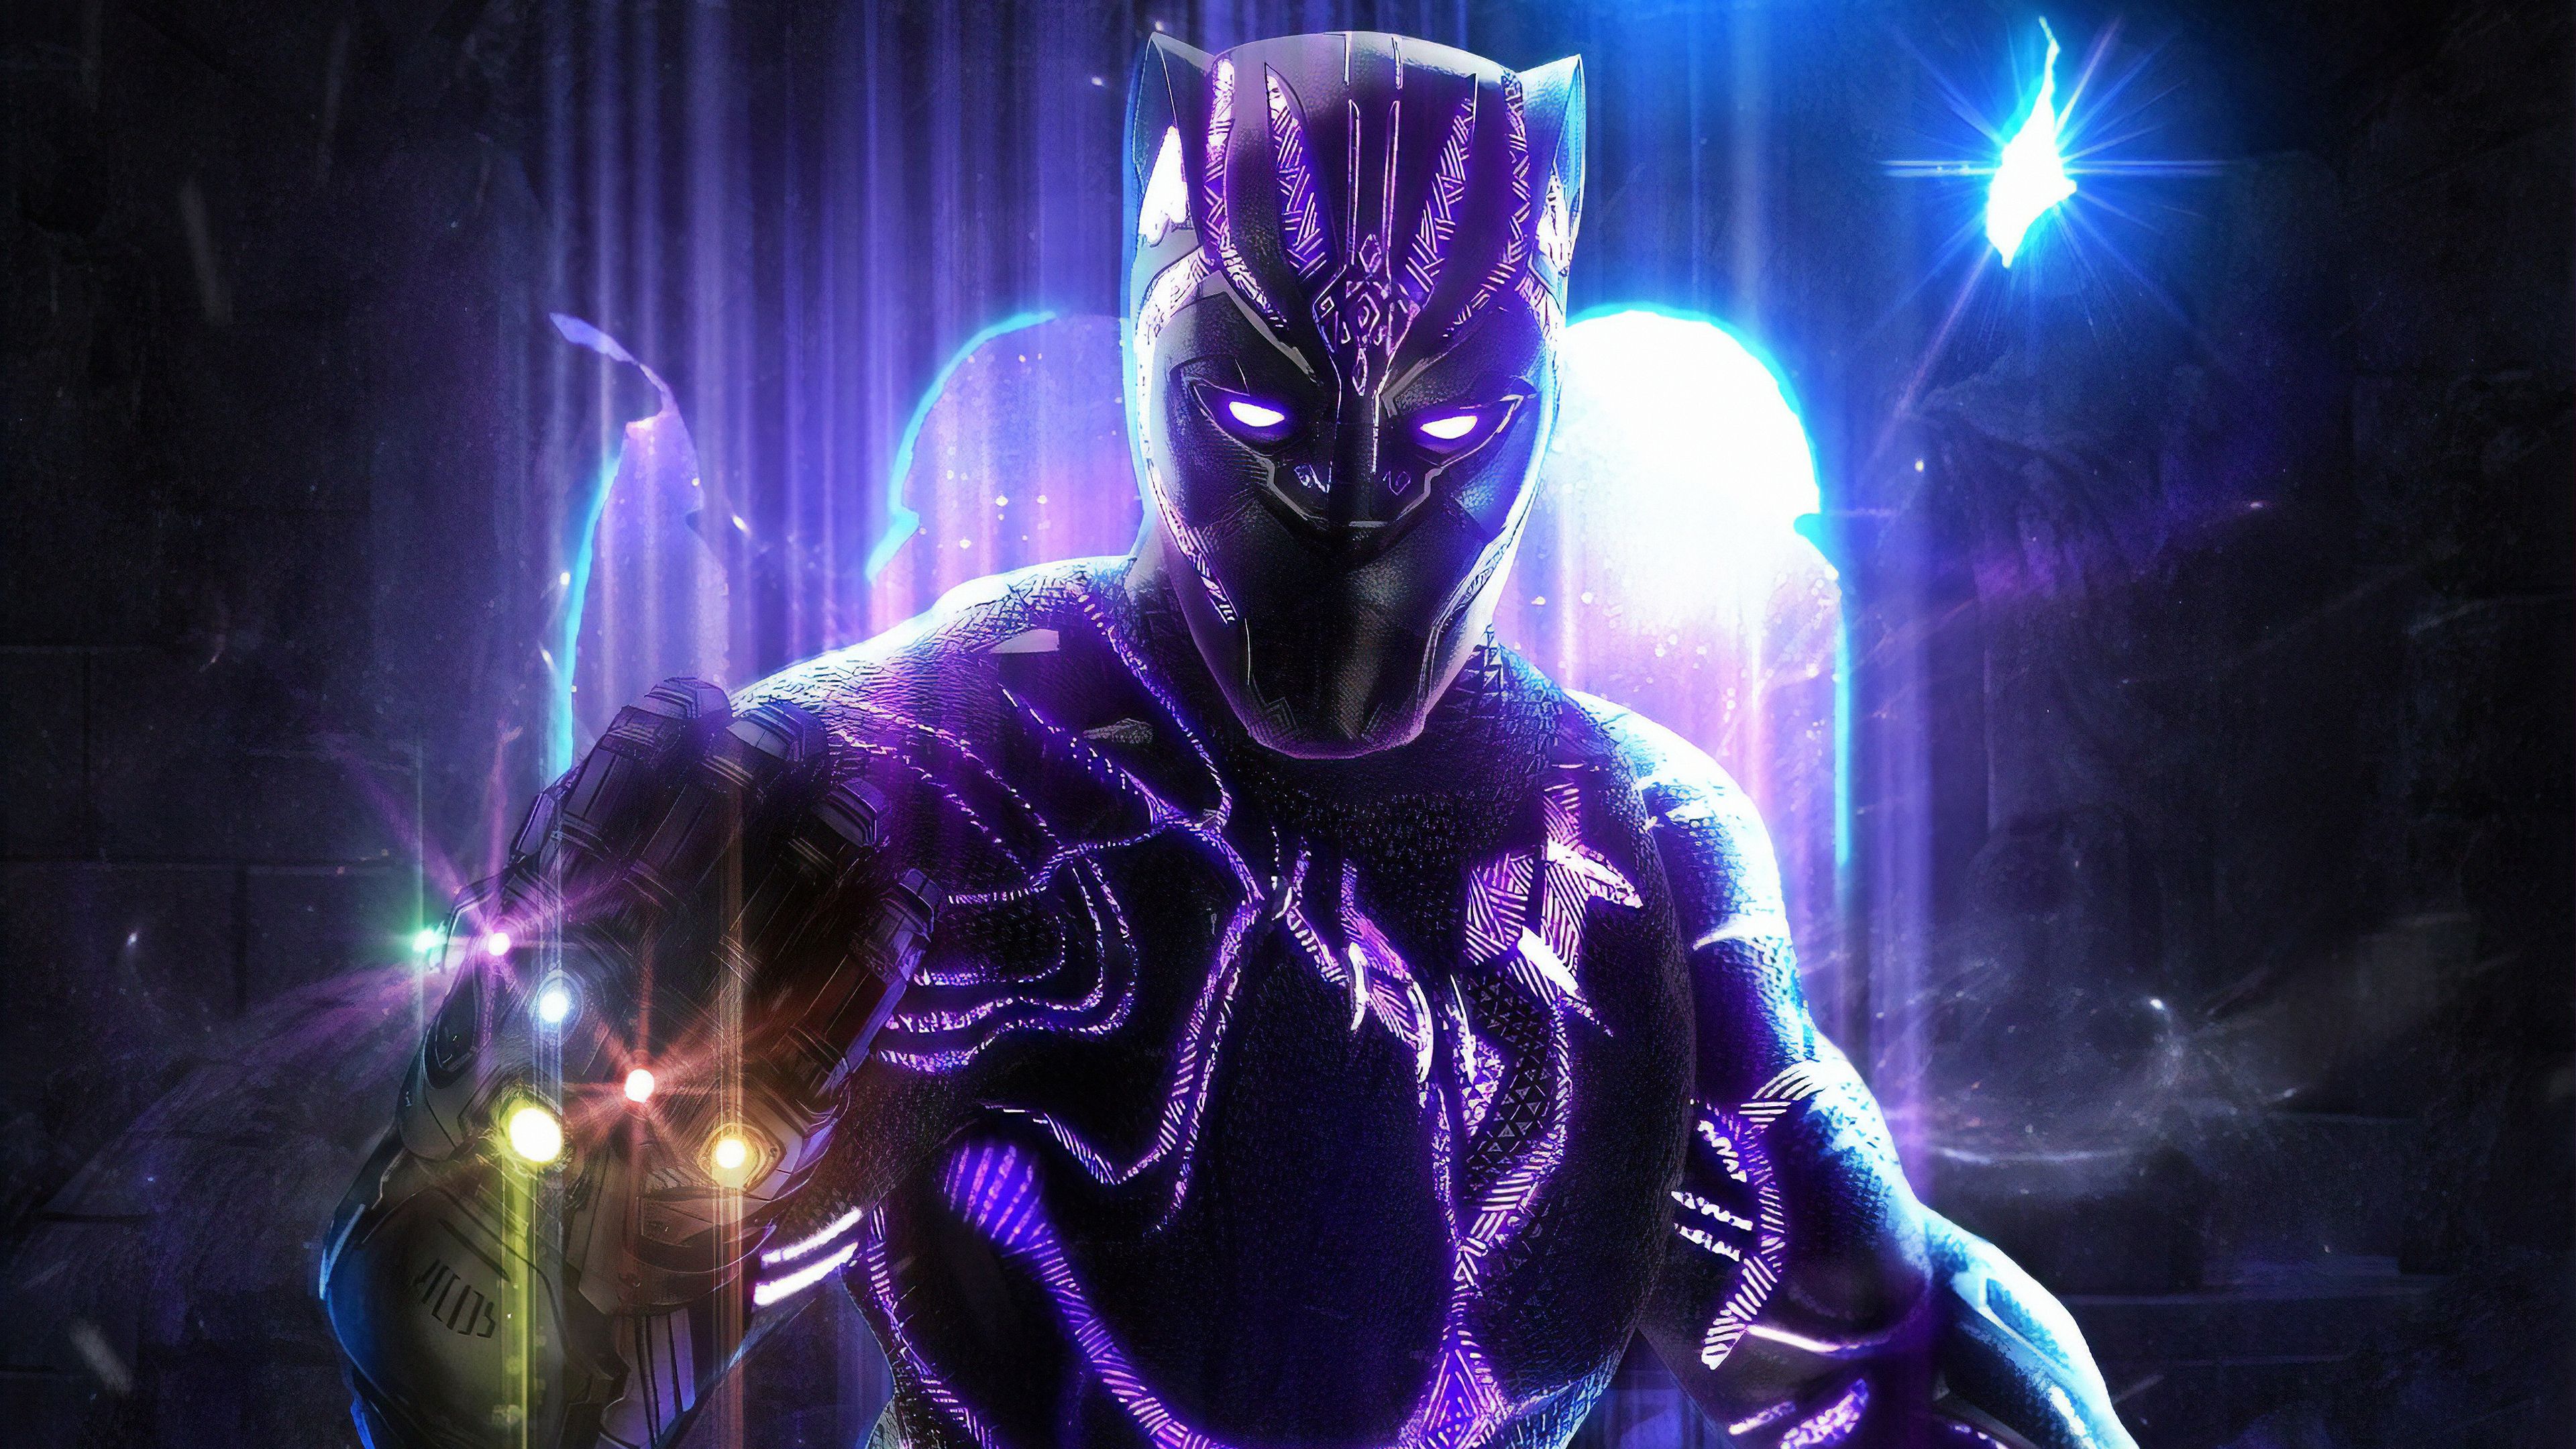 Wallpaper 4k Black Panther With Infinity Gauntlet 4k Wallpaper, Artwork Wallpaper, Black Panther Wallpaper, Digital Art Wallpaper, Hd Wallpaper, Superheroes Wallpaper